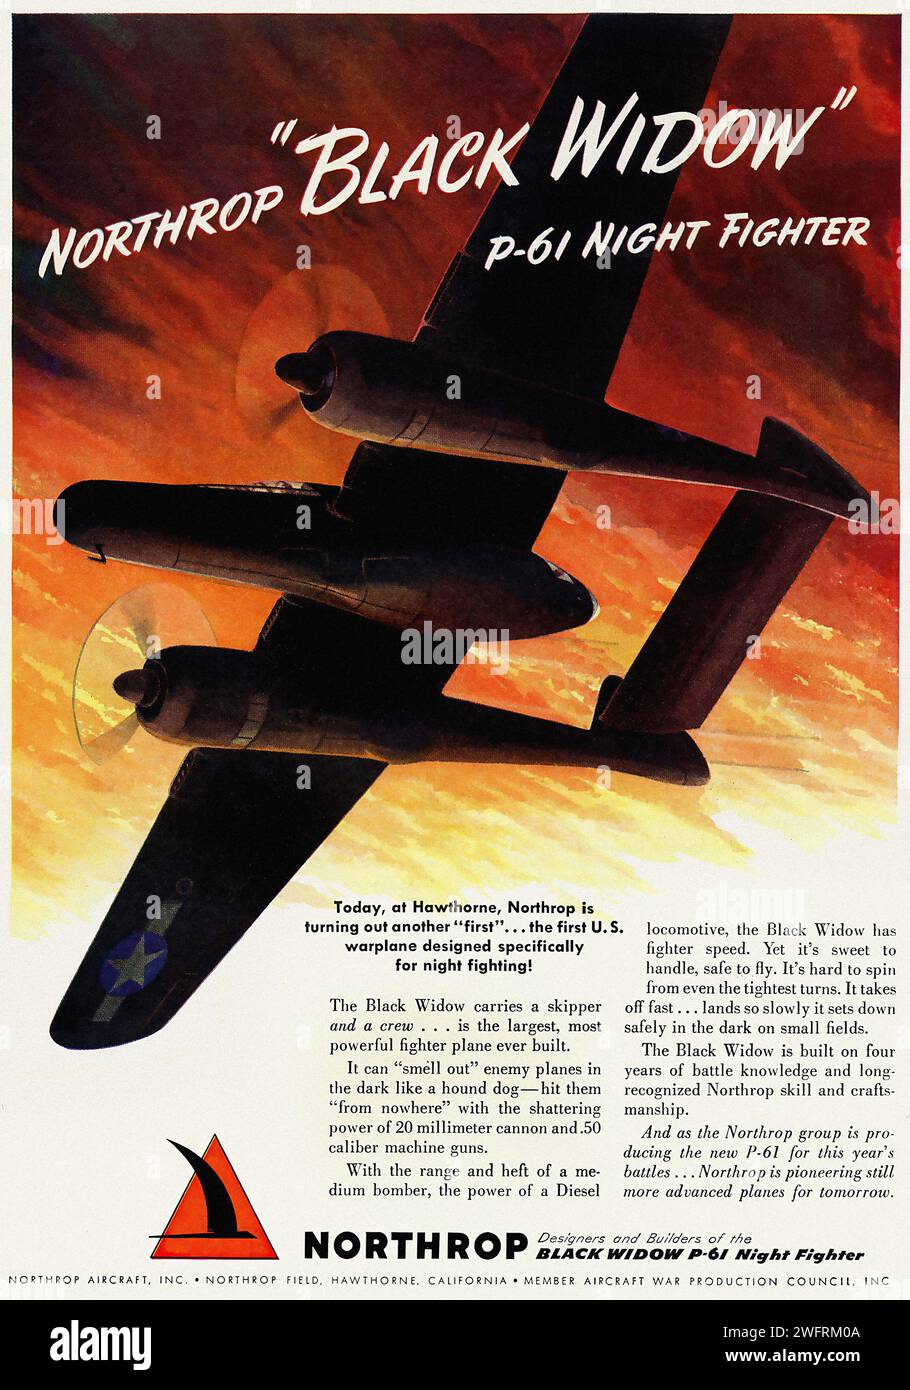 “NORTHROP 'BLACK WIDOW' FIGHTER”  A striking vintage advertisement from the World War II era, featuring the Northrop P-61 Black Widow fighter plane. The image is rendered in a bold graphic style typical of the period, with dramatic angles and vibrant colors.  The advertisement is for Northrop Aircraft, Inc., based in Hawthorne, California. - American (U.S.) advertising, World War II era Stock Photo